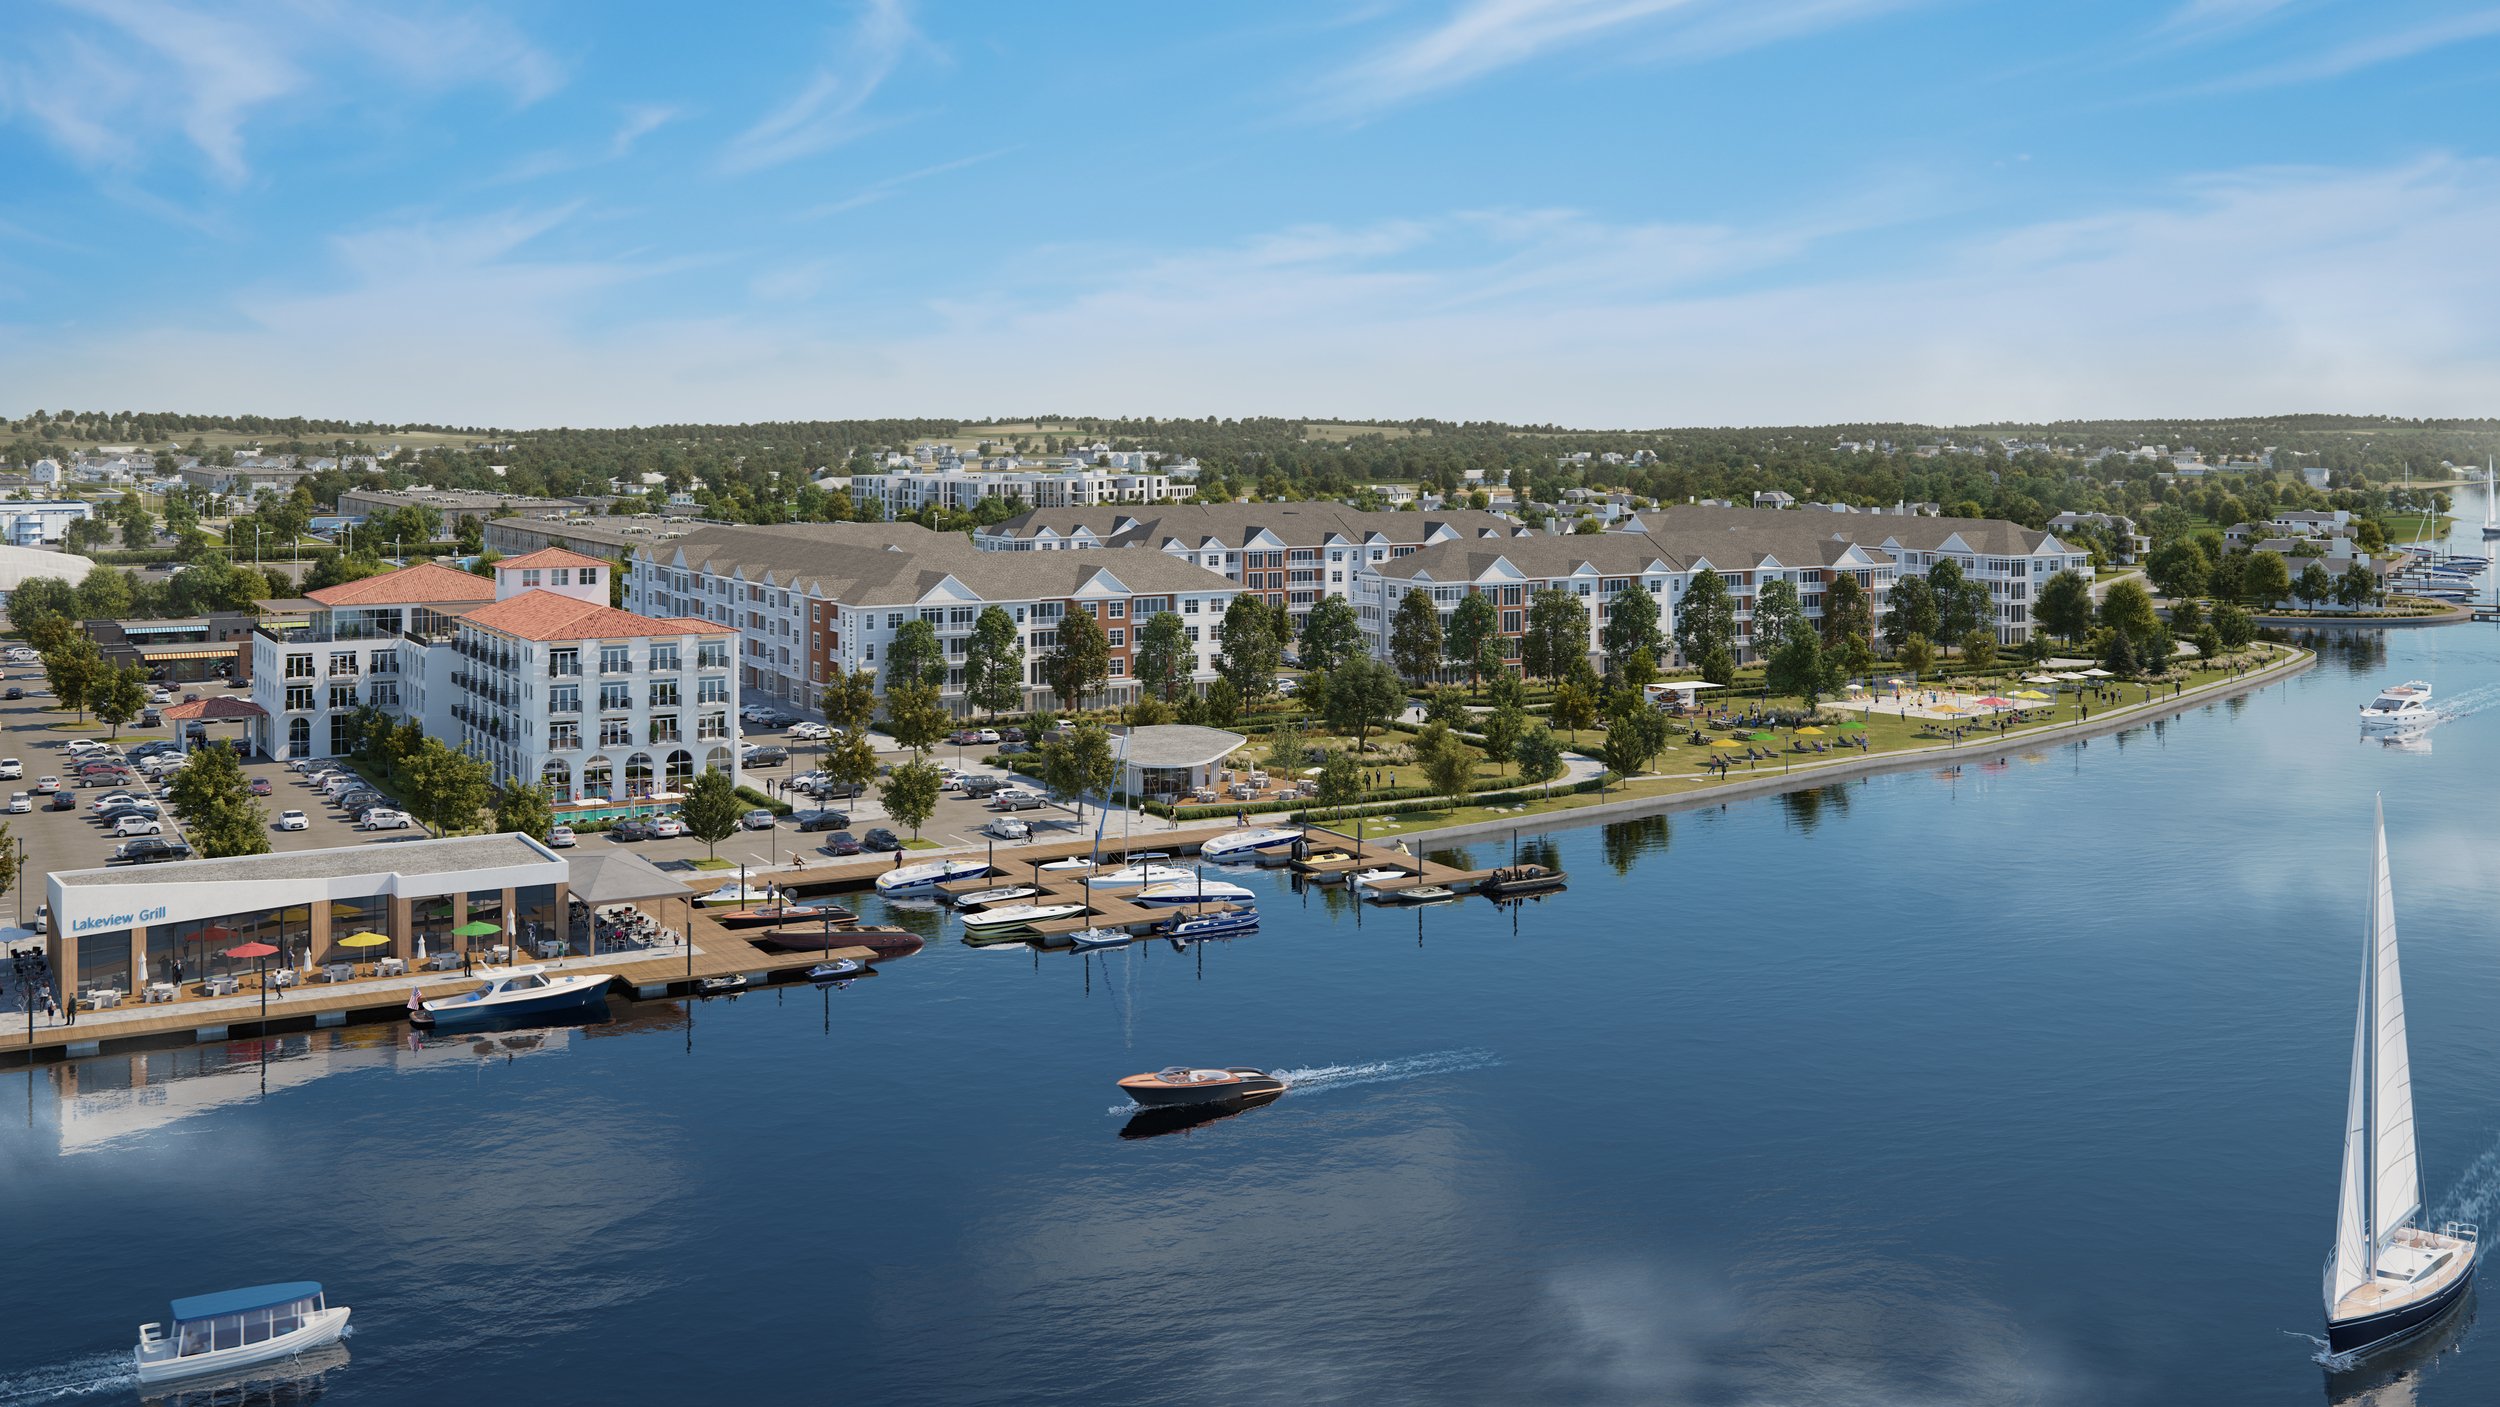 Mixed-use development with 2,000 square feet of lake frontage in the works in Granbury – Dallas Business Journal thumbnail